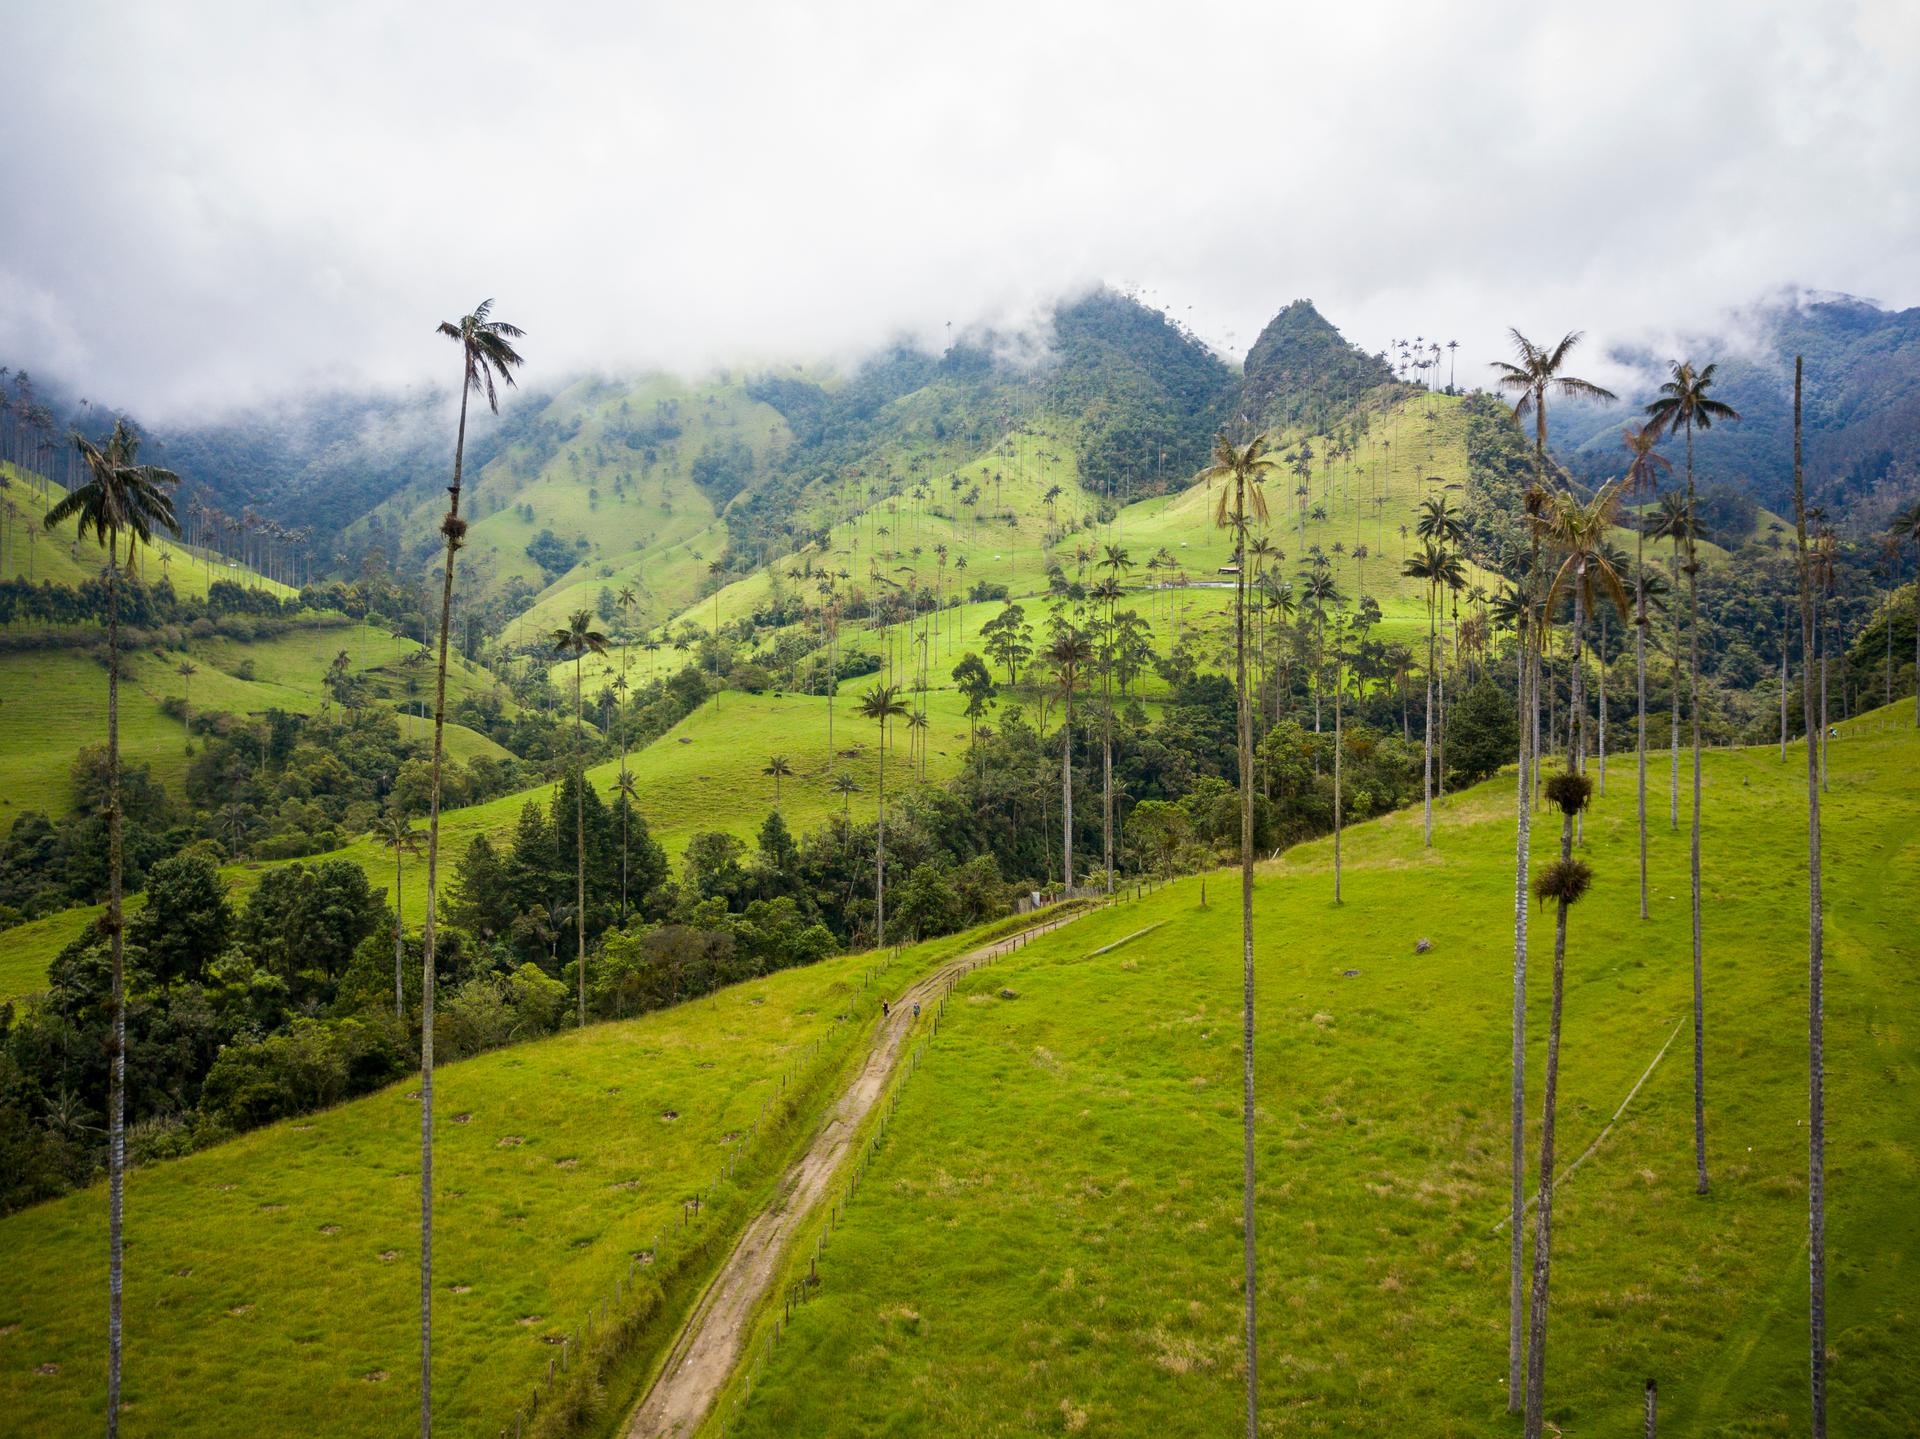 The Cocora valley in the Colombian province of Quindio inspired the landscapes in 